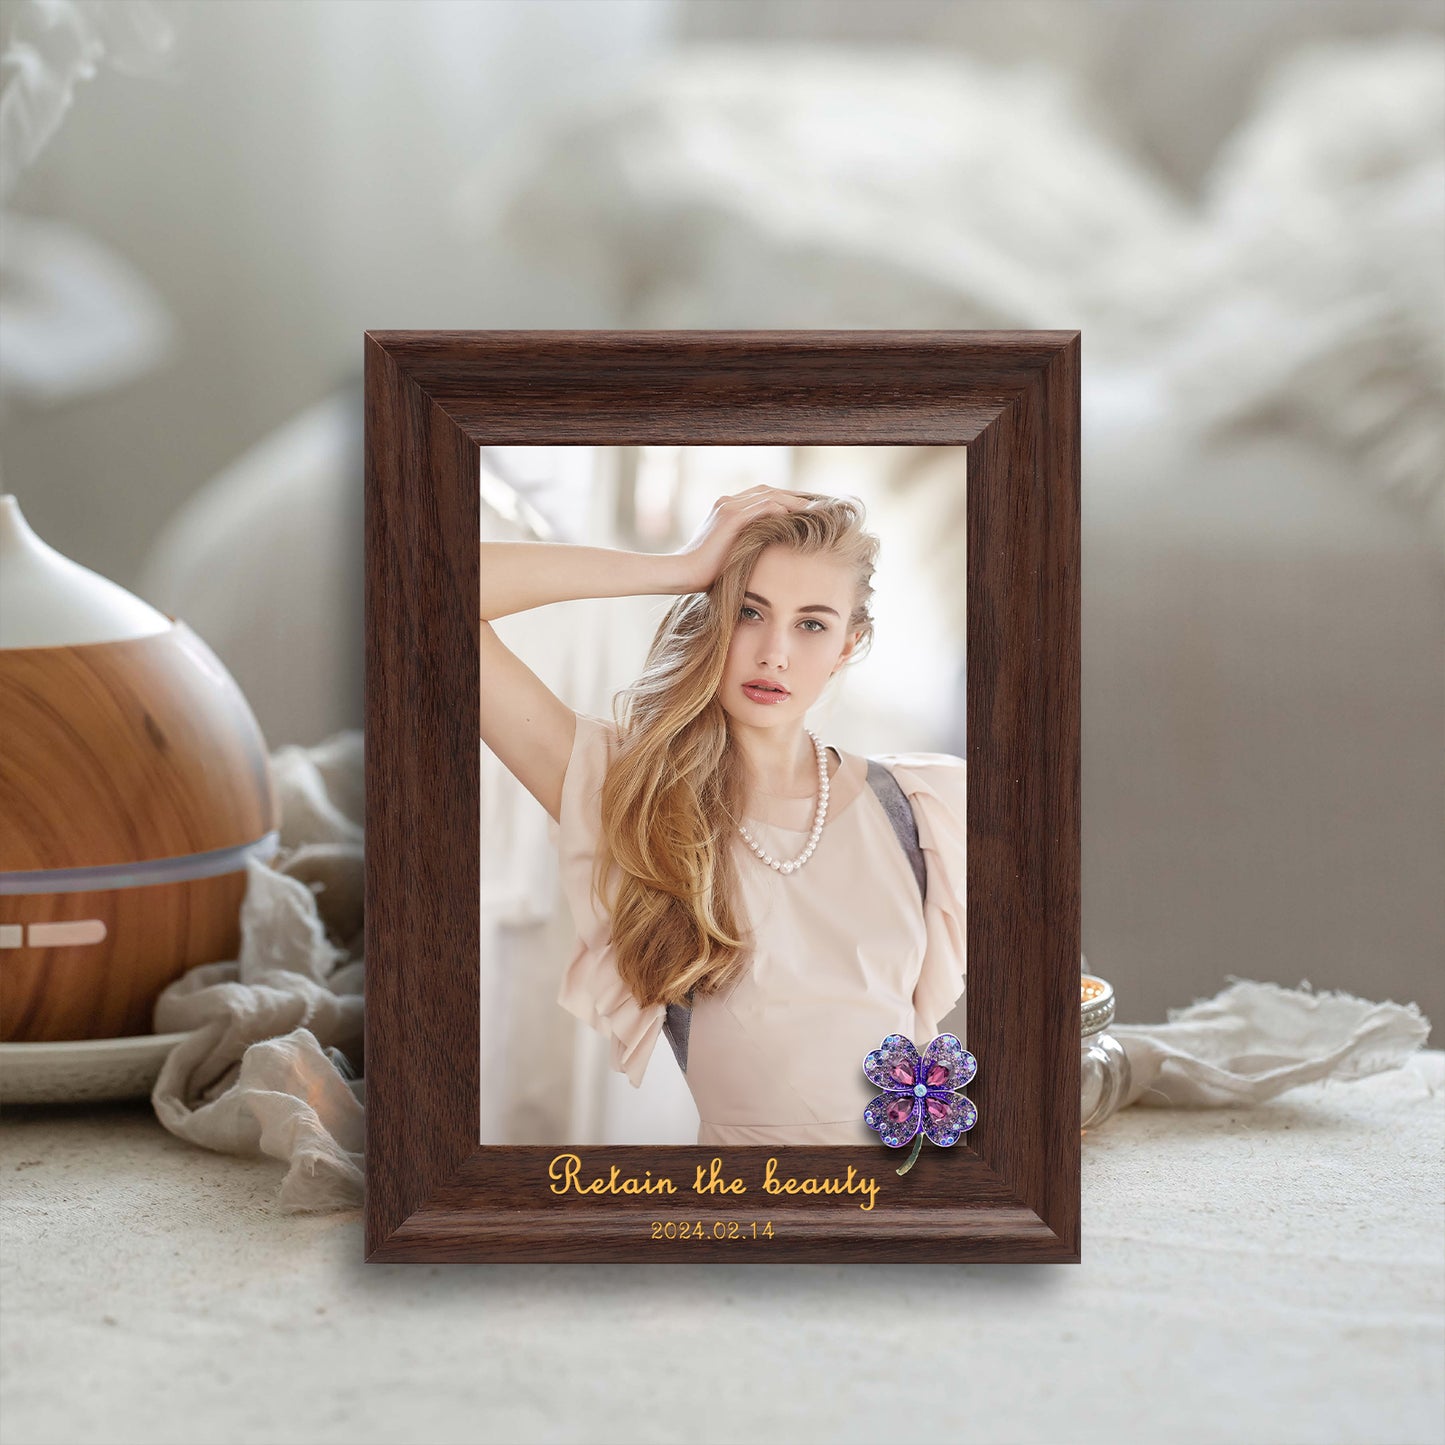 Decorating Photo Frames Ideas Dotride Custom Picture Frame, Wood Photo Frame with Custom Wooden Carving, Can be engraved with any text you want, suitable for Suitable for Various Themes, Clover Brown